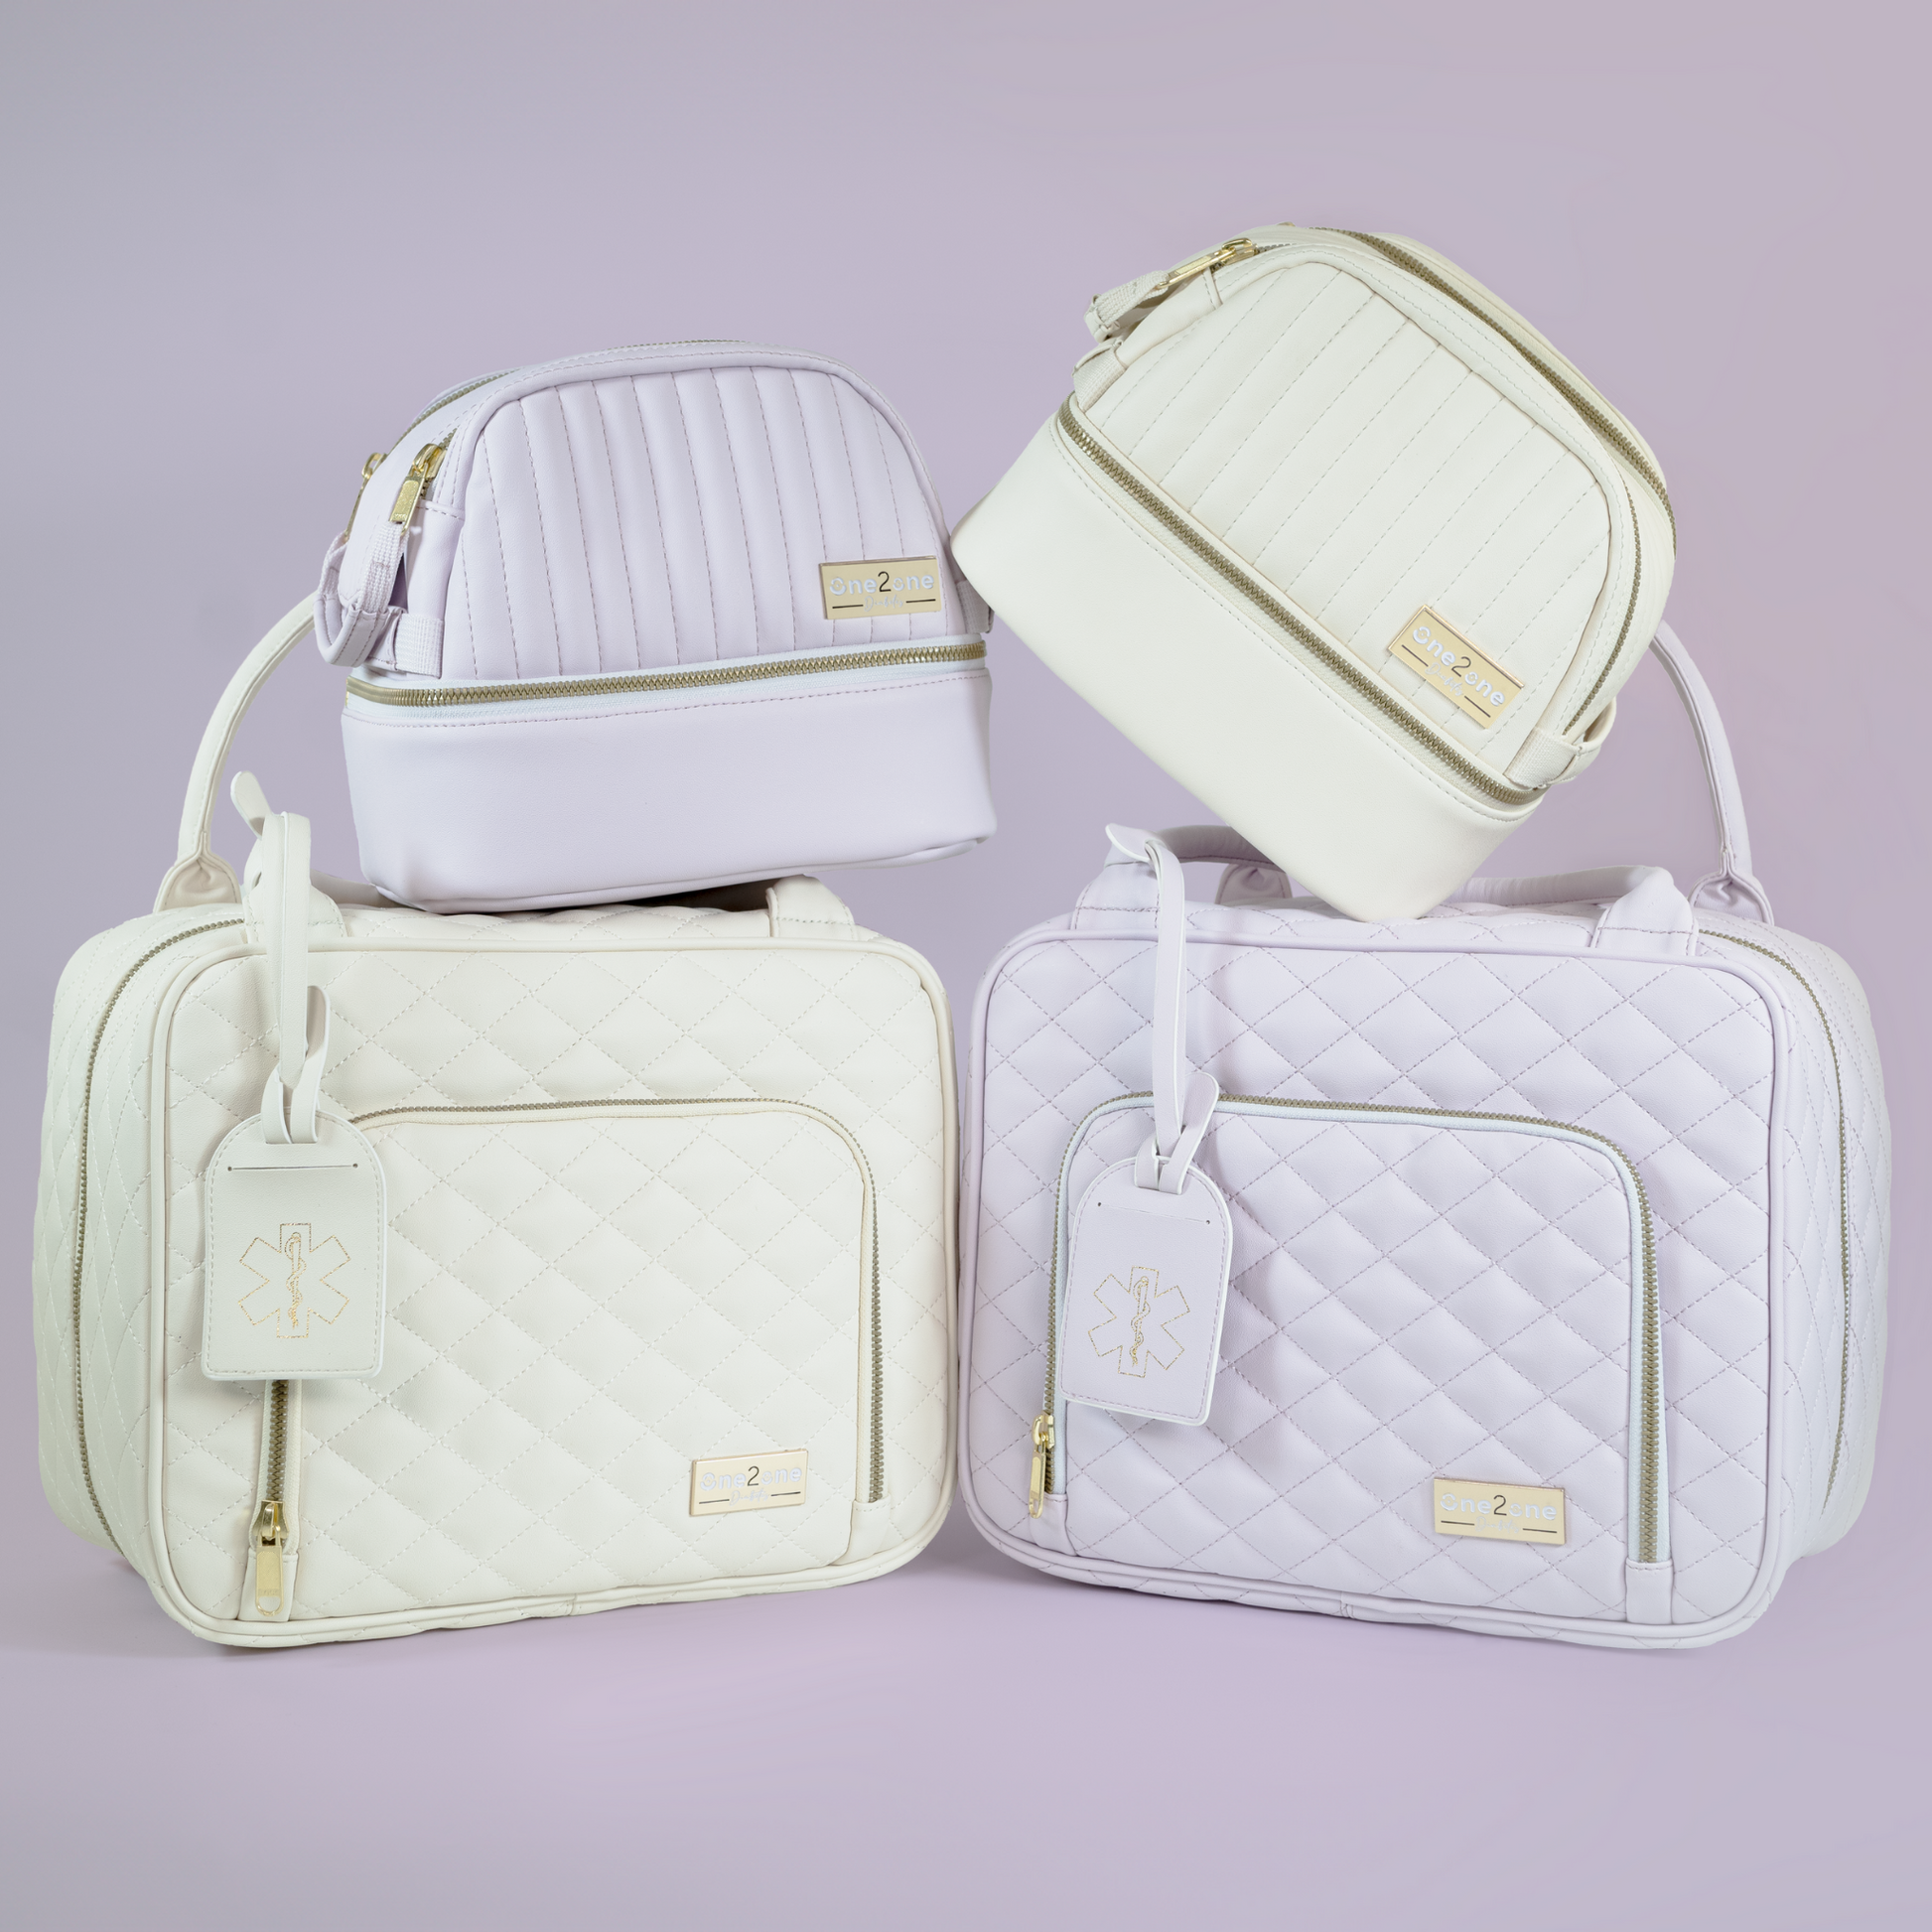 Two small diabetes travel bags in lavender and white stacked on top of two large diabetes travel bags in lavender and white on a purple background.